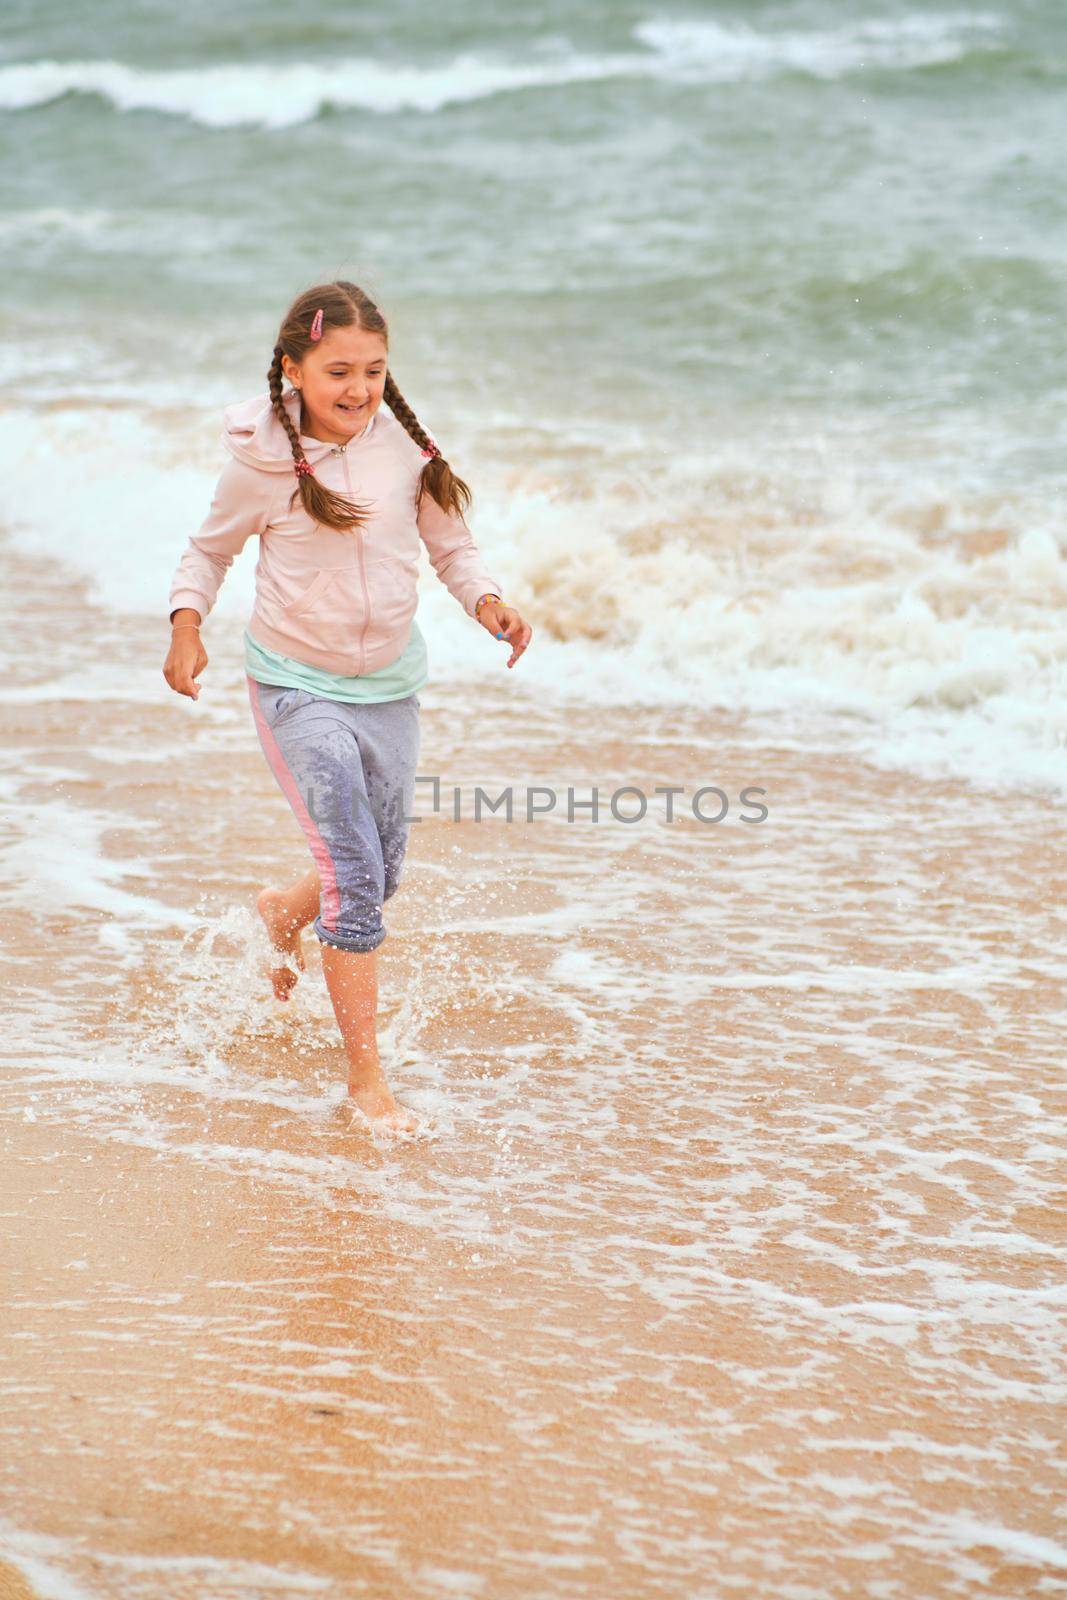 Happy child playing in the sea. Kid girl having fun at the beach. Summer vacation and active lifestyle concept